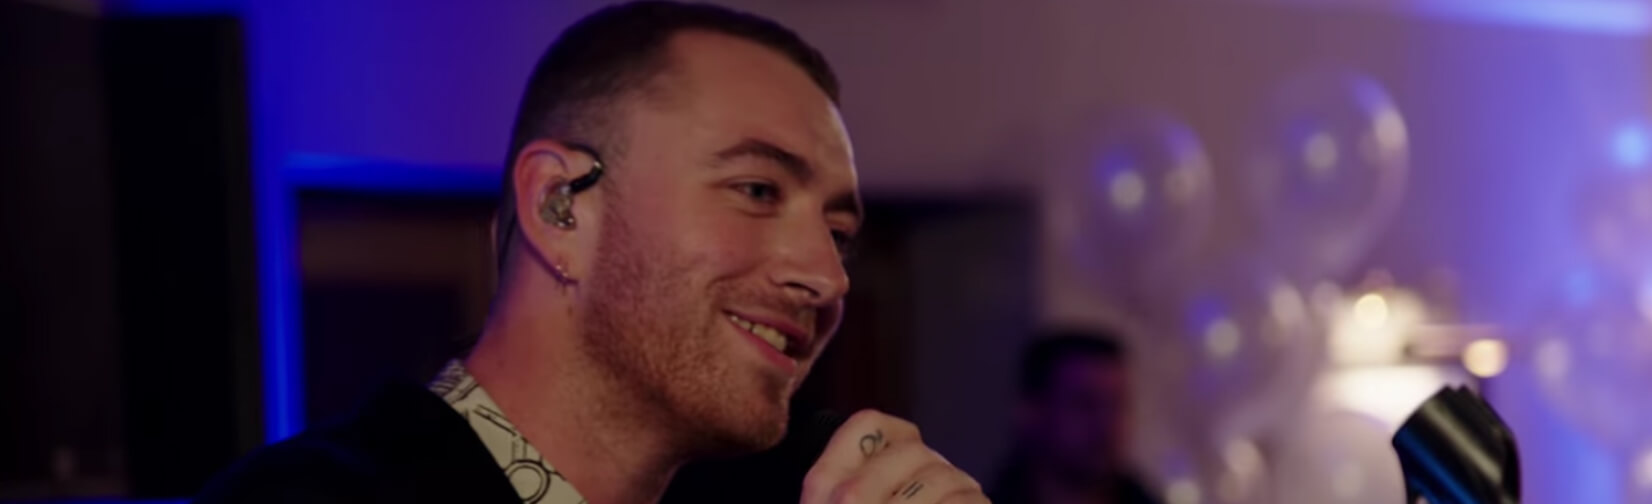 Cameras-followed-Sam-Smith-as-he-surprised-two-brides-at-their-wedding-reception.